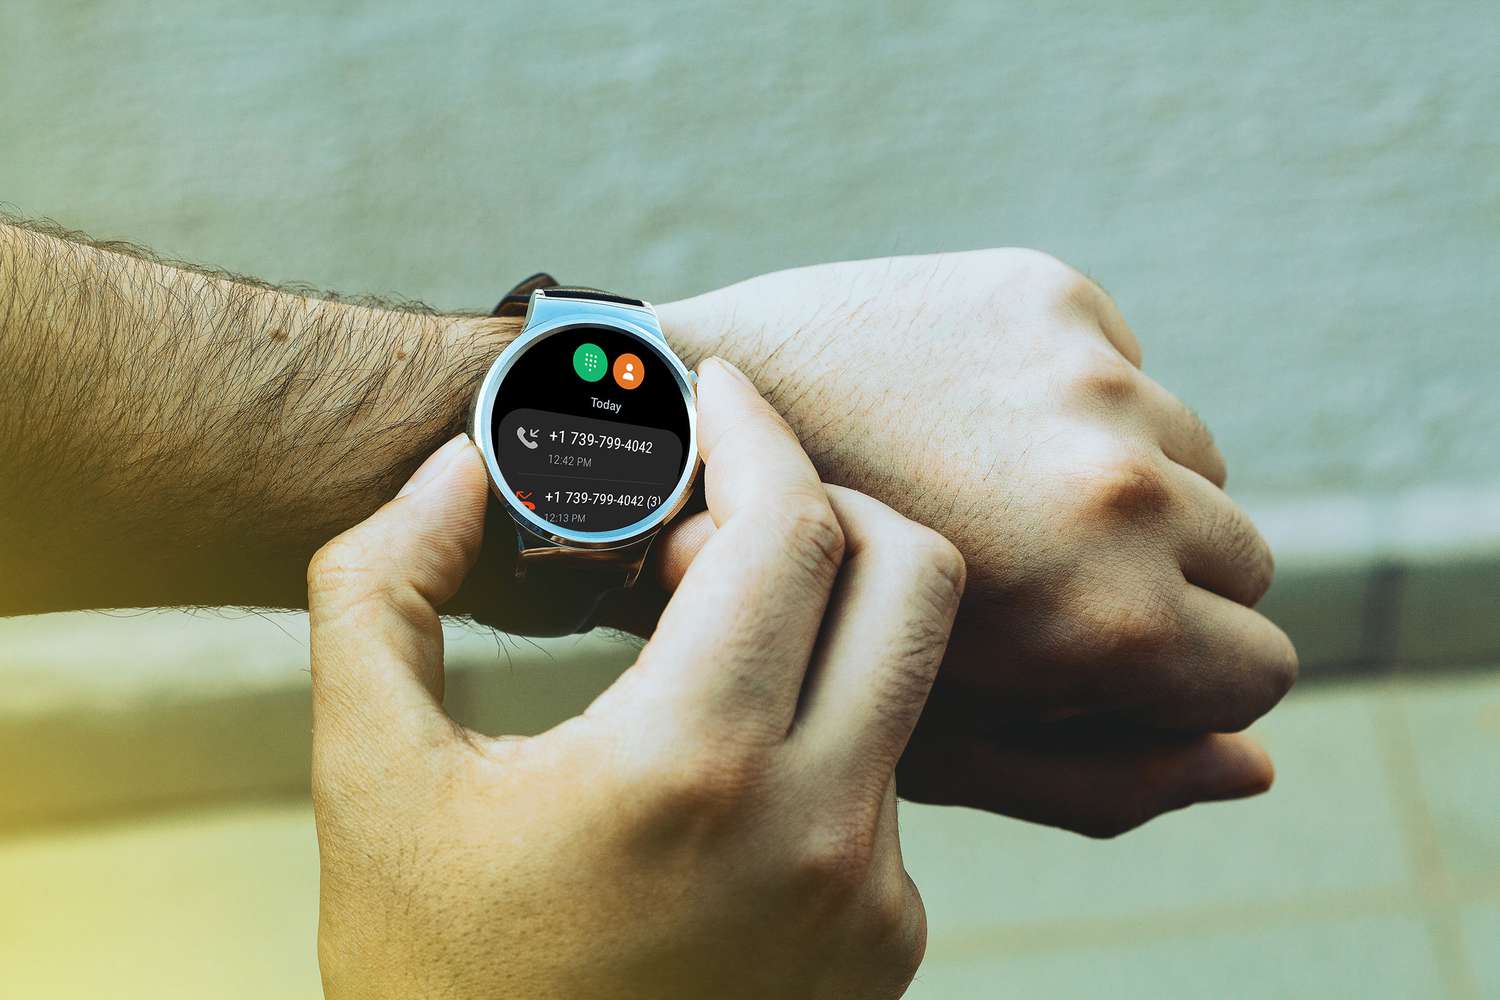 How To Make Calls On Galaxy Watch Active 2 Without Phone